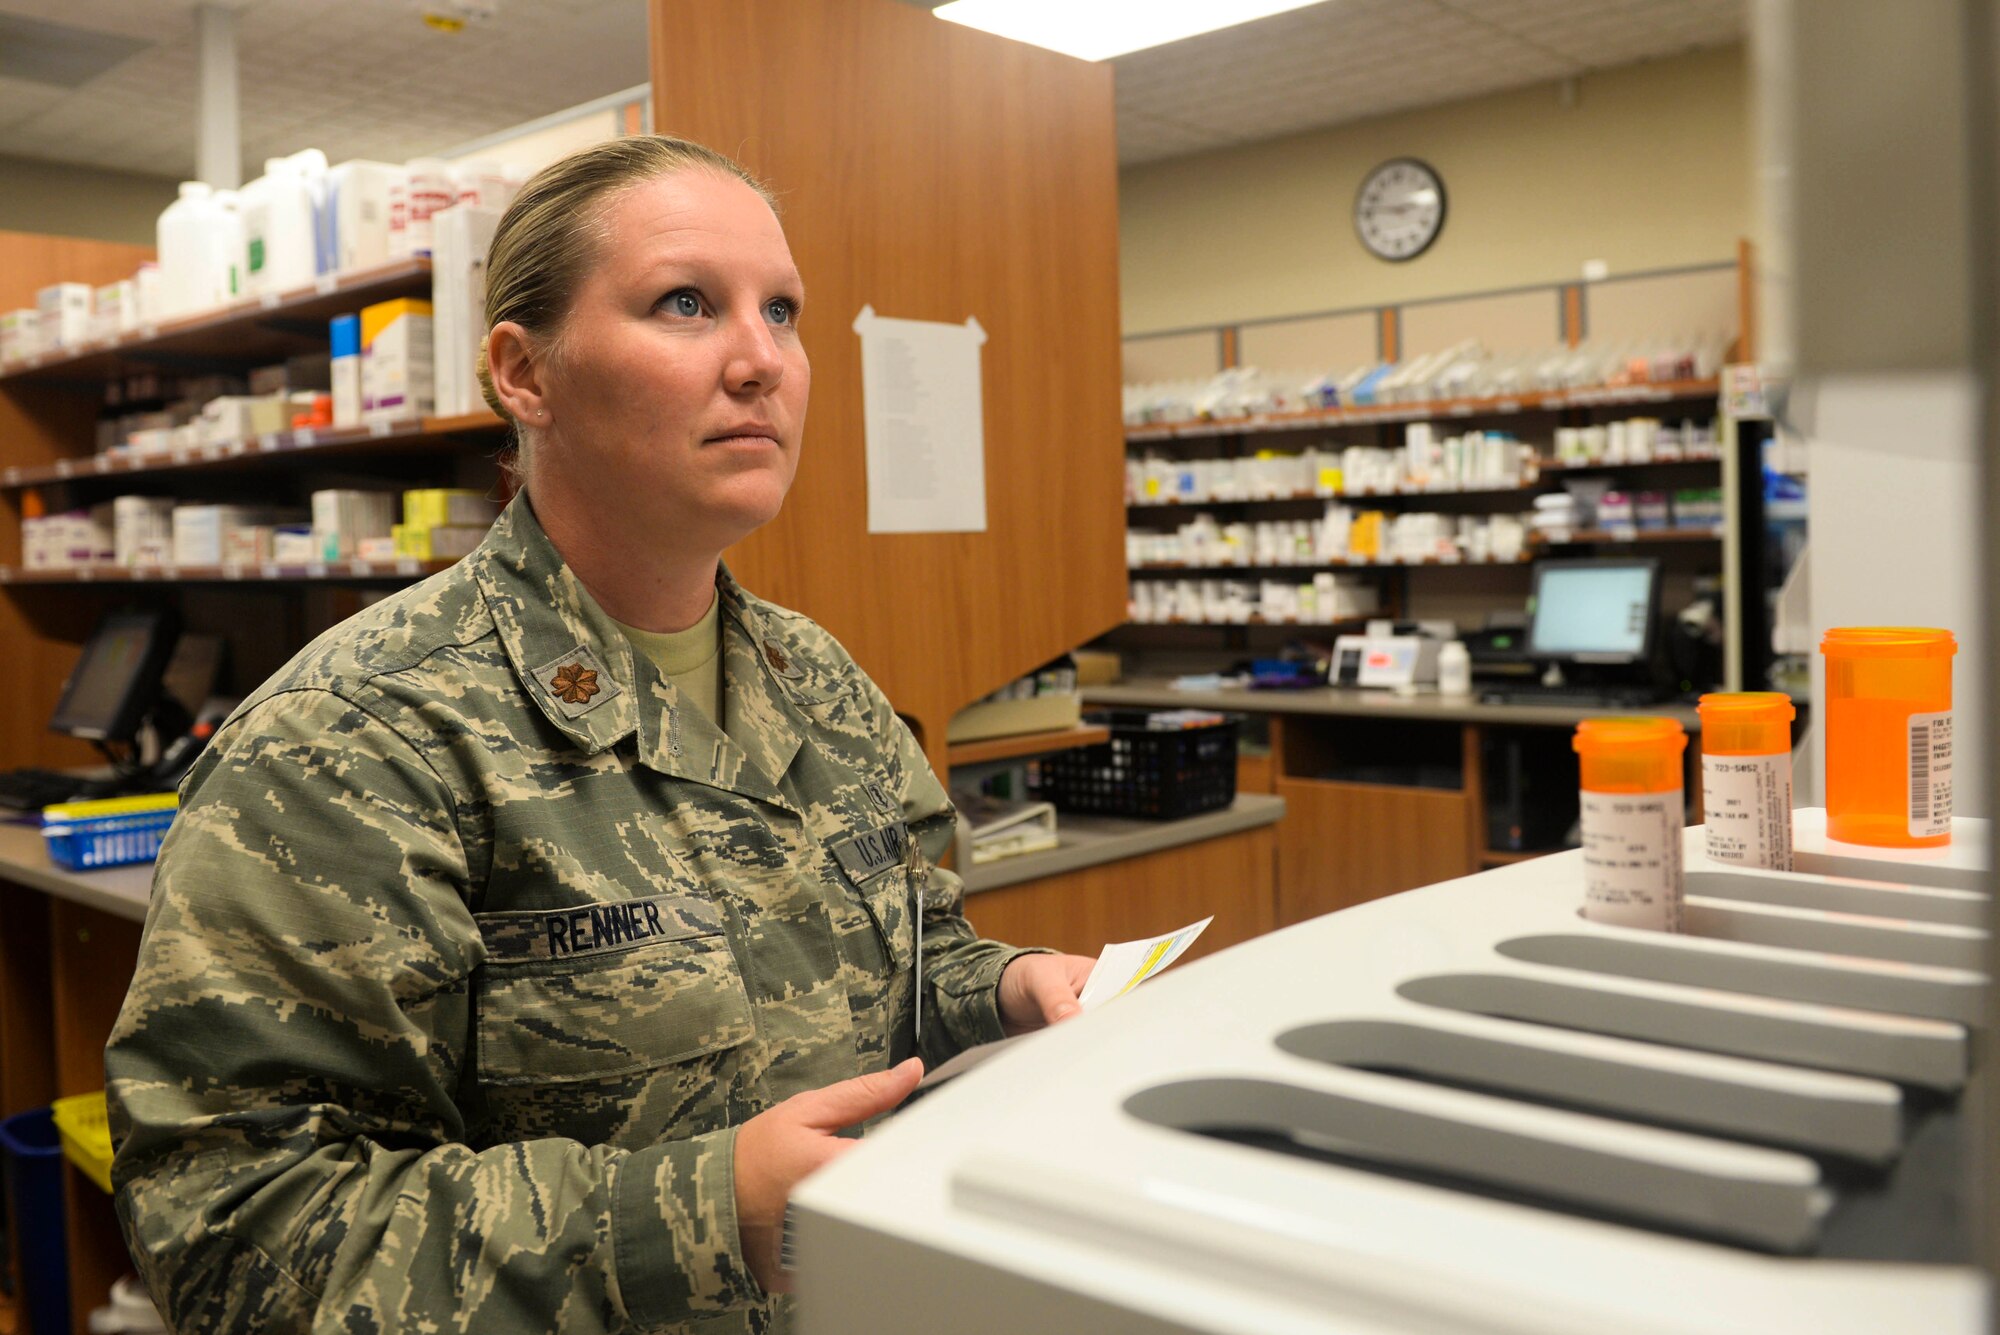 Maj. Brandy Renner, the chief pharmacy element assigned to the 5th Medical Support Squadron, confirms prescriptions at Minot Air Force Base, N.D., Aug. 17, 2016. This automated machine fills prescriptions while technicians check to ensure the correct medicine, correct dosage and correct number of pills are placed in the proper bottle. (U.S Air Force photo/Airman 1st Class Jessica Weissman)